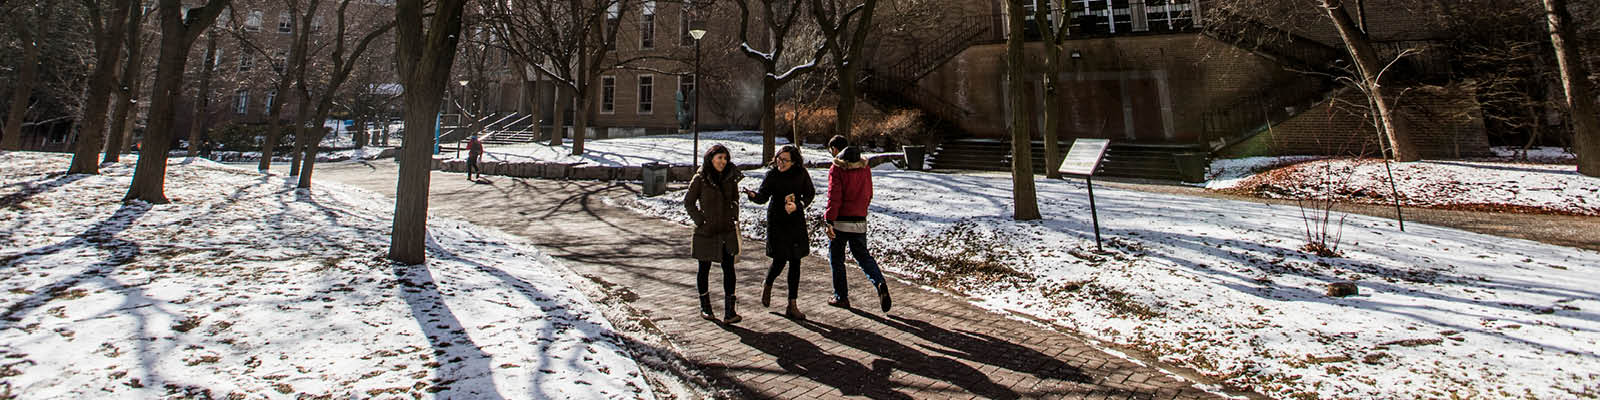 A sunny winter's day on campus. Two three people walking in the snowy Quad.